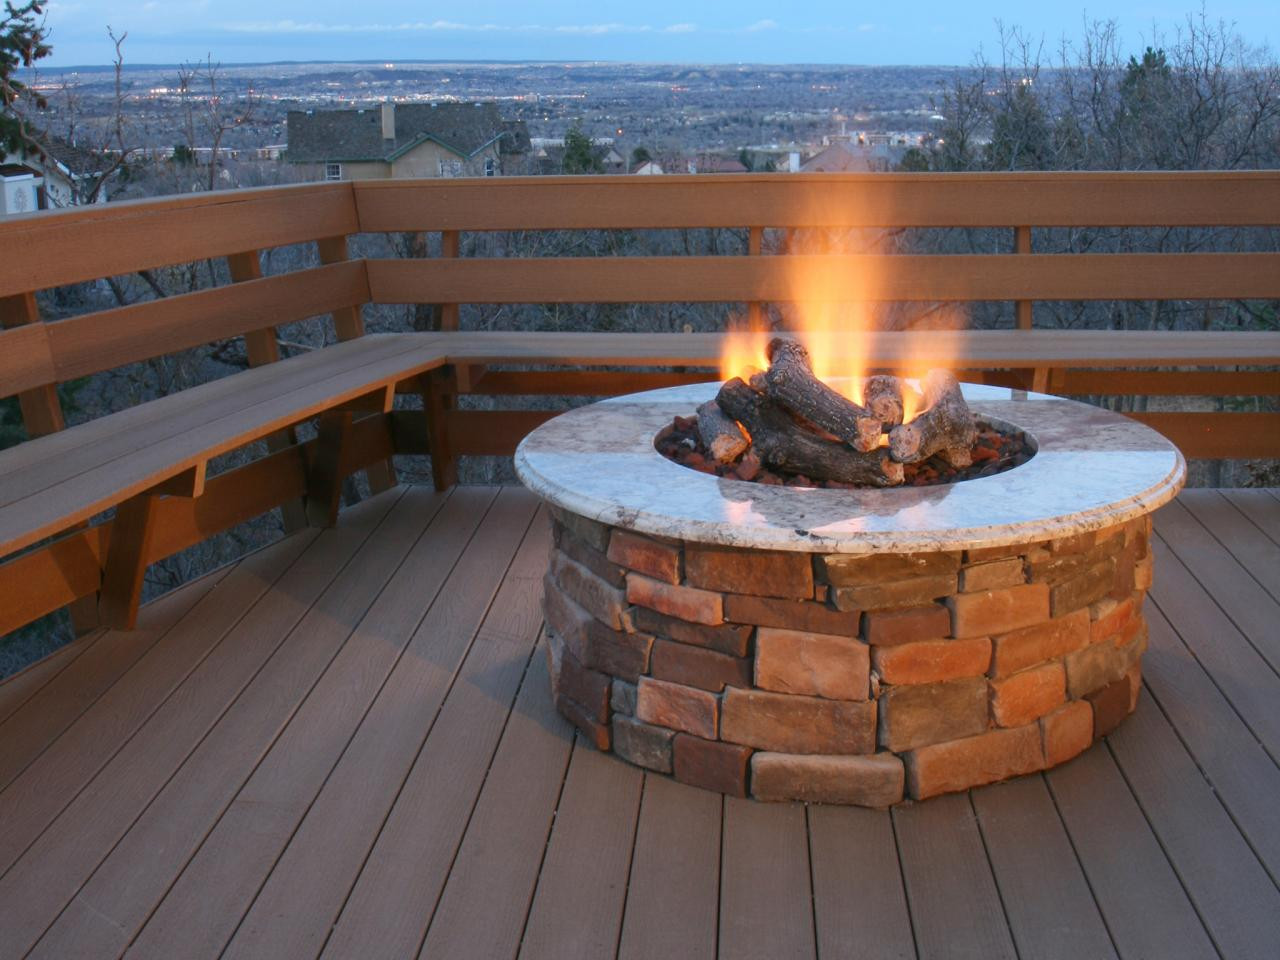 DIY Outdoor Propane Fire Pit
 DIY Outdoor Propane Fire Pit